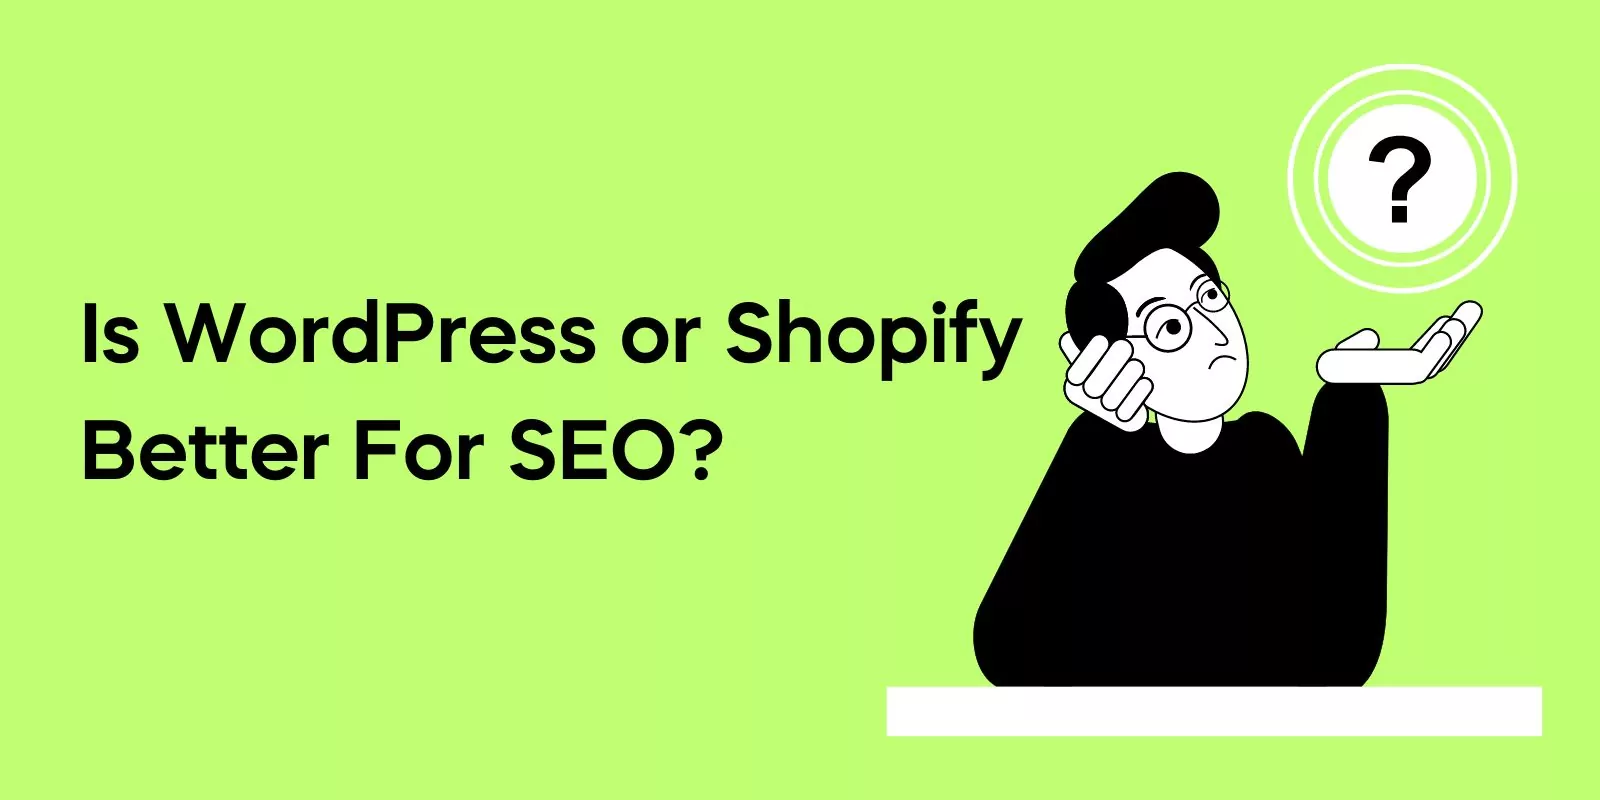 Is WordPress or Shopify Better For SEO